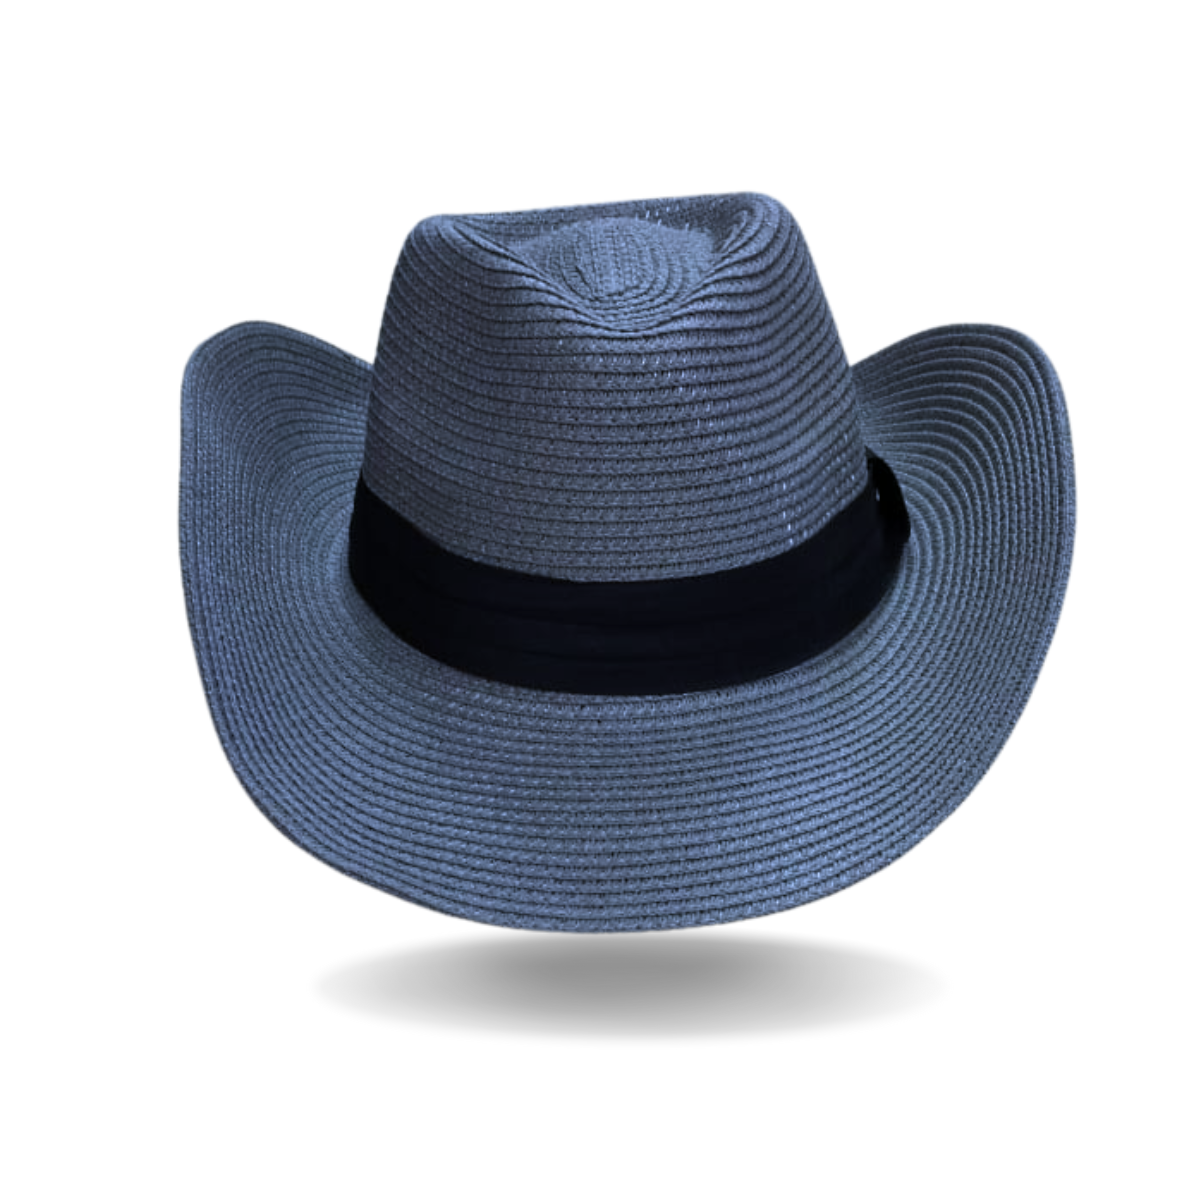 GolfBasic Men's Straw Hat with Band